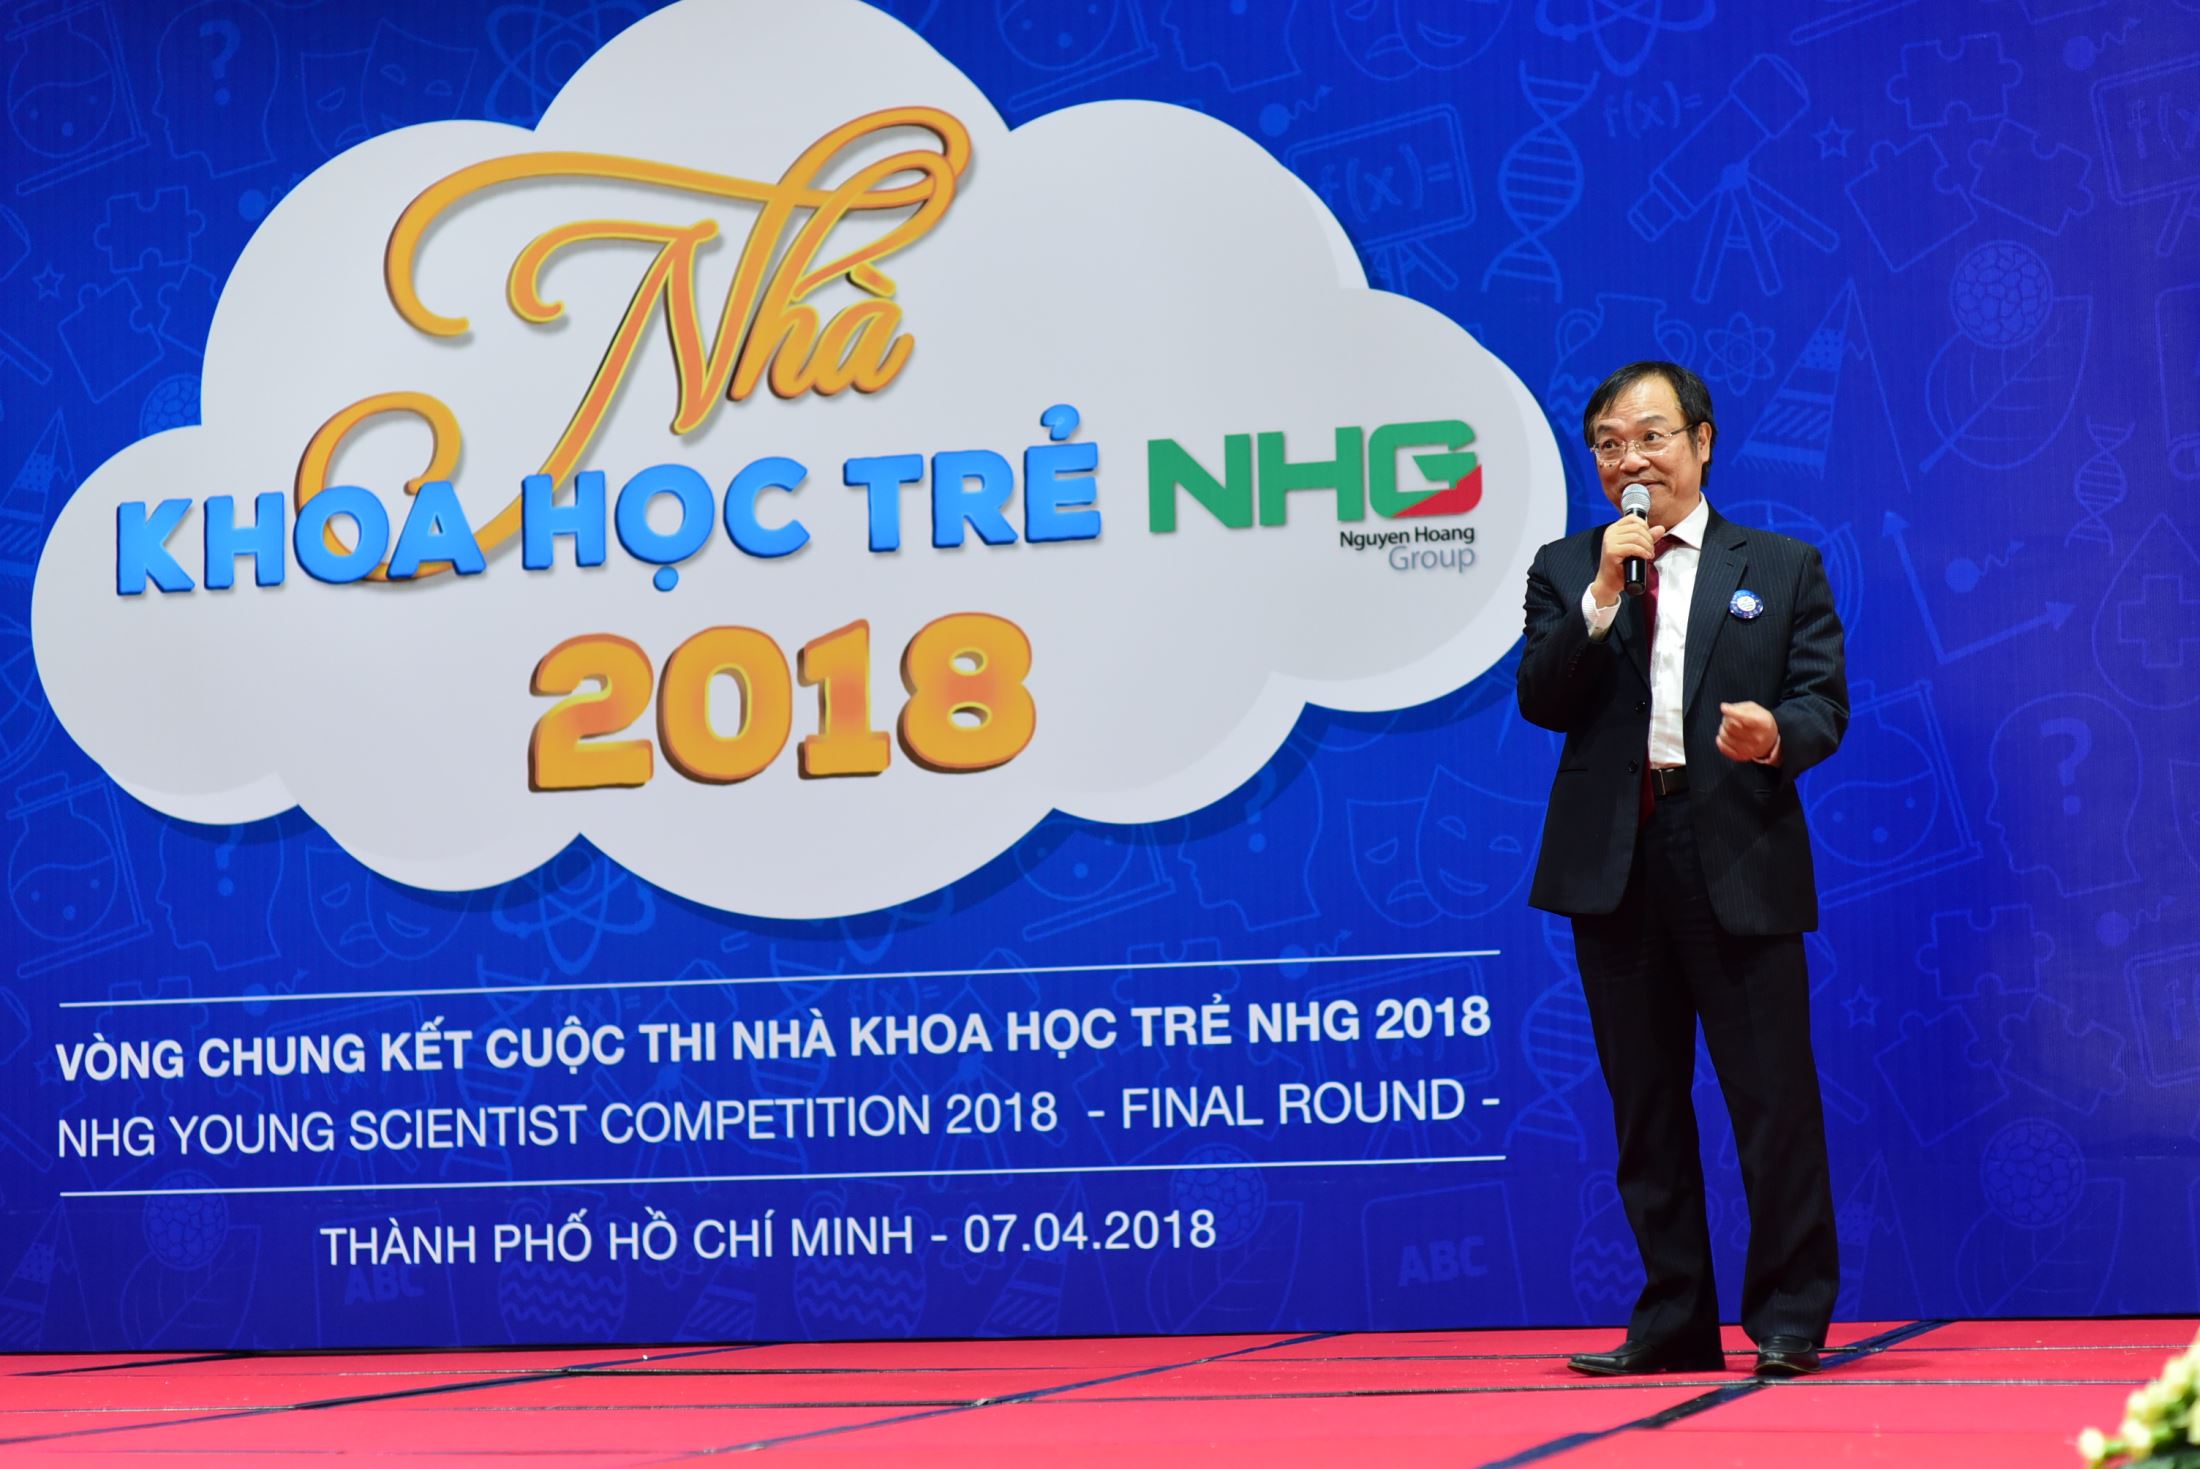 Dr. Dinh Quang Nuong, Deputy CEO of NHG highly appreciated this season’s projects for expressing the practicality, community-based quality and great creativity of NHG students